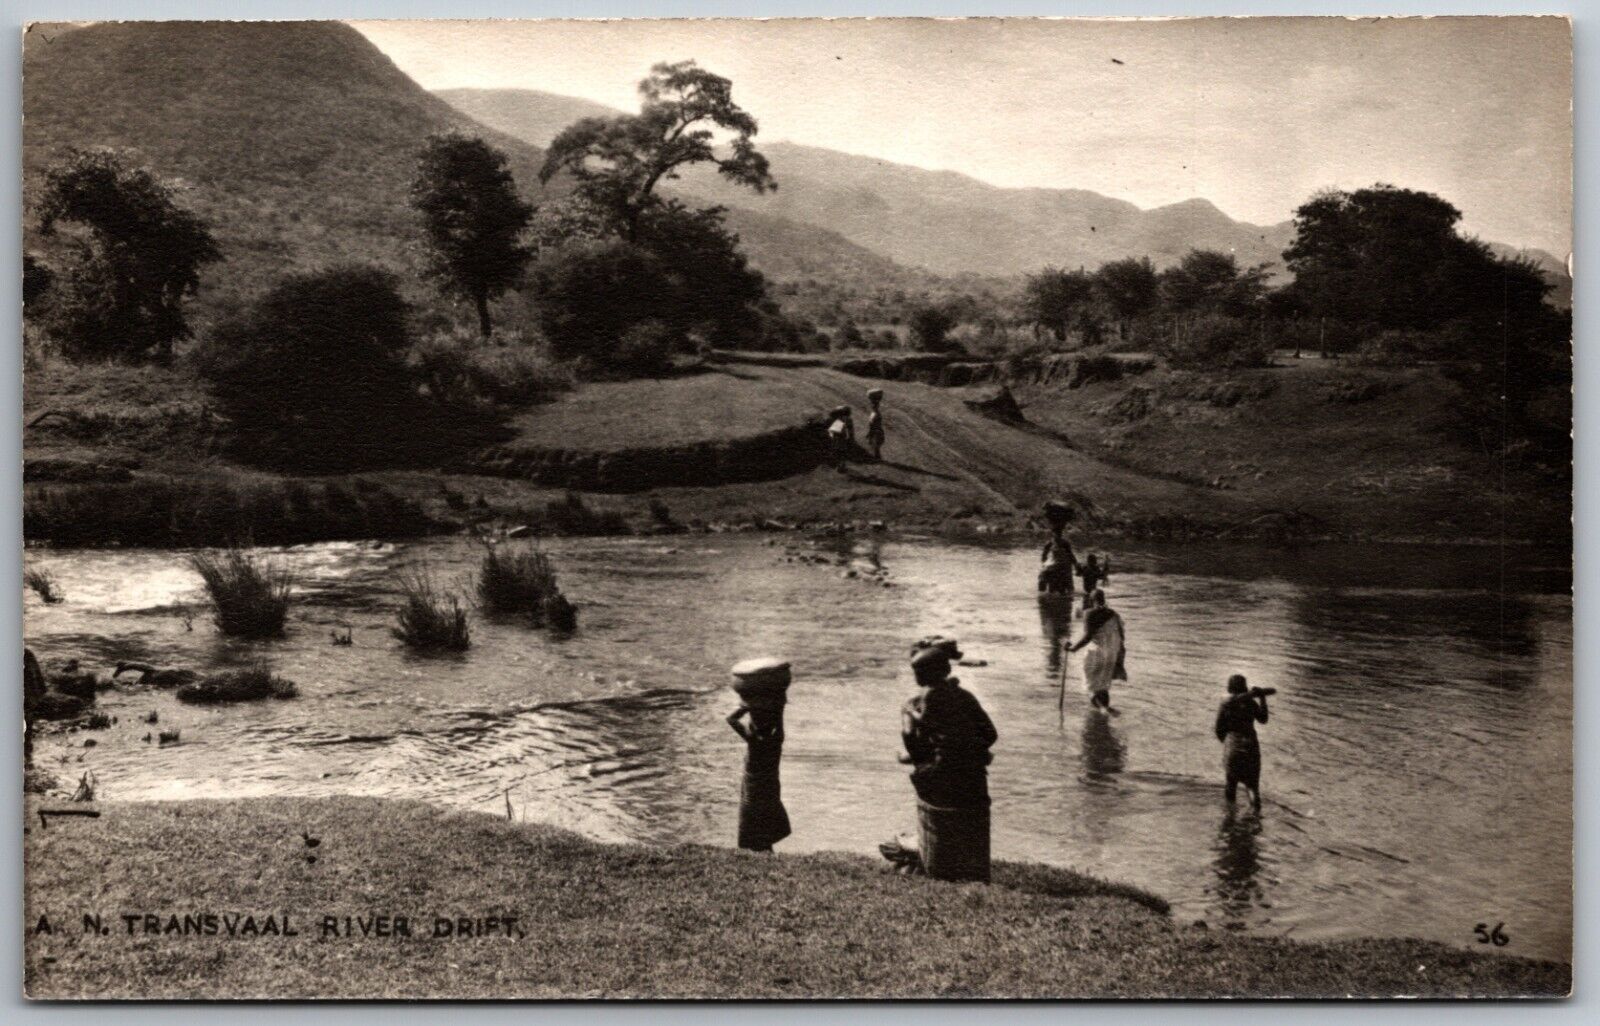 transvaal river drift south africa people carrying goods across water postcard